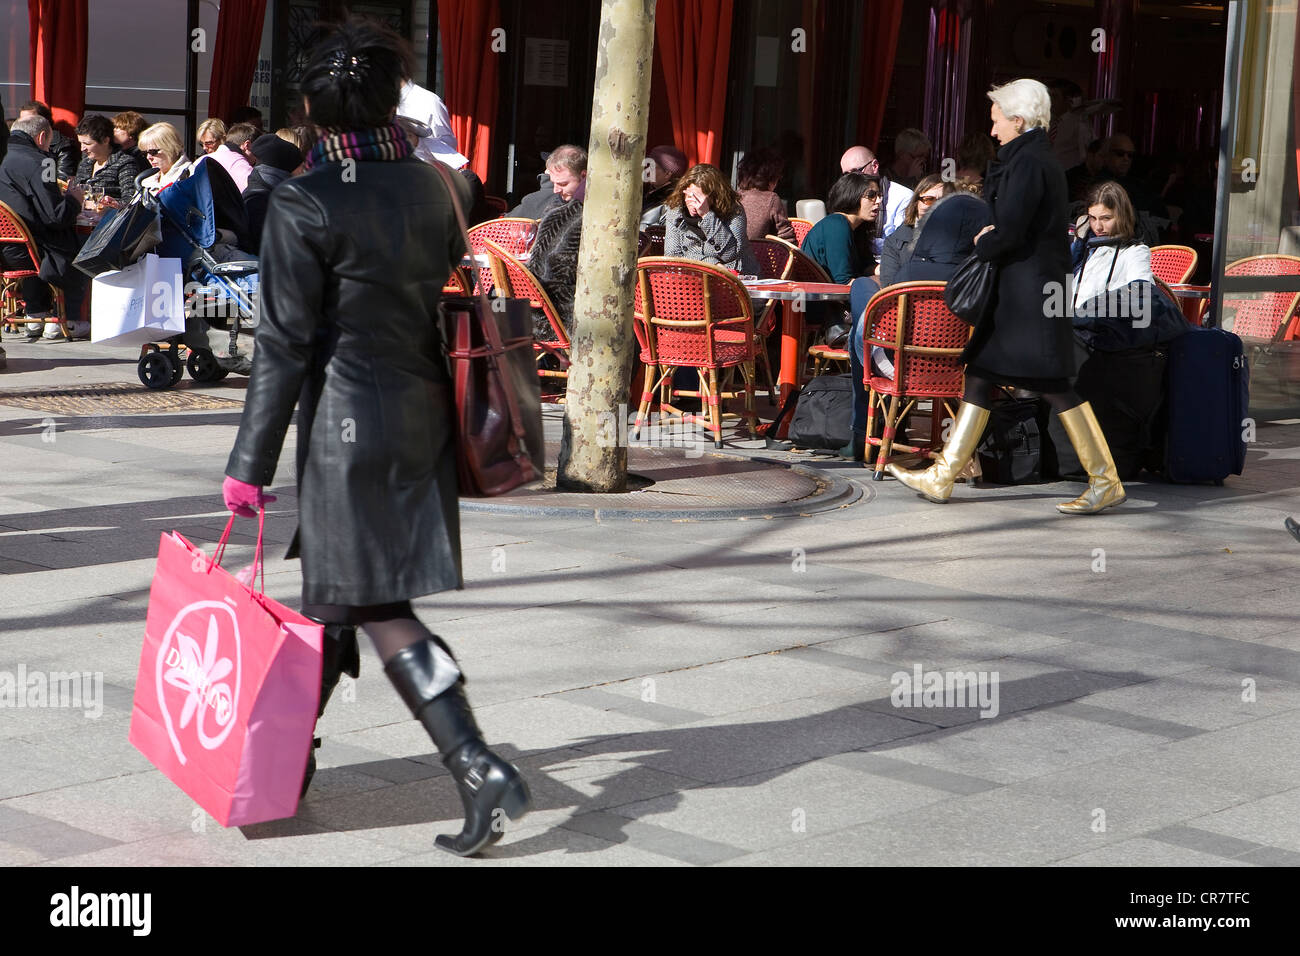 France, Paris, Avenue des Champs Elysees, pedestrian from the back in front of the terrace of a cafe Stock Photo